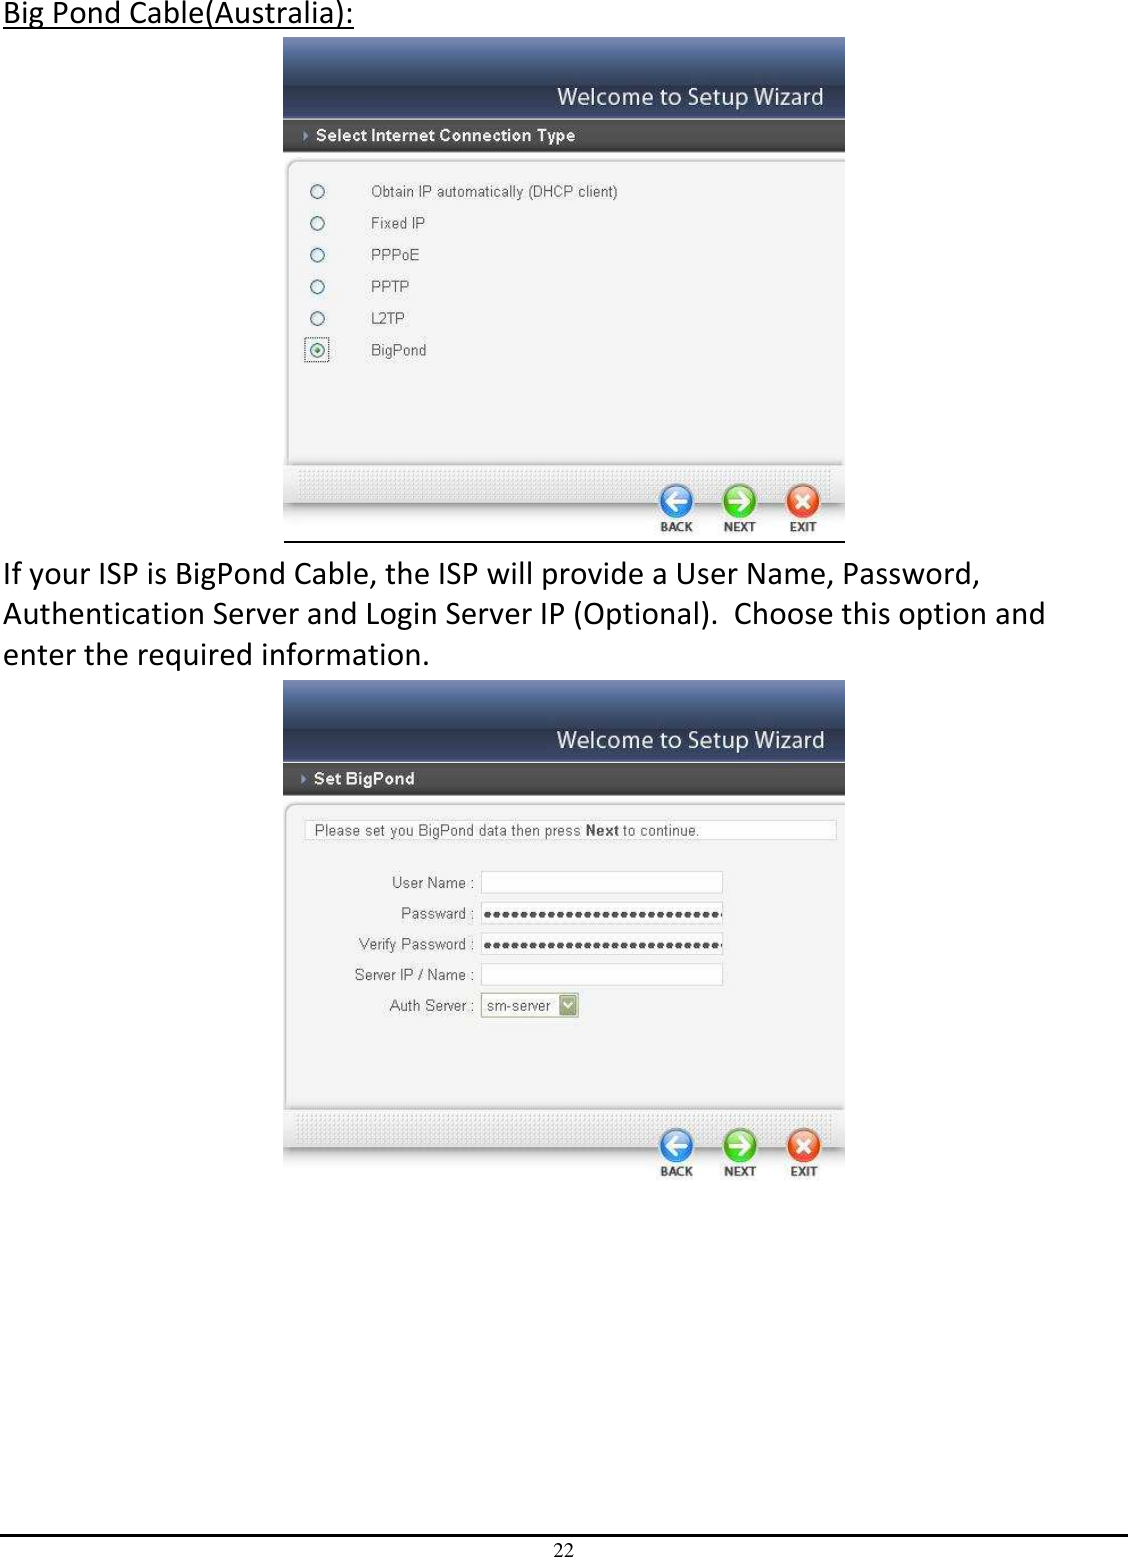 22 Big Pond Cable(Australia):  If your ISP is BigPond Cable, the ISP will provide a User Name, Password, Authentication Server and Login Server IP (Optional).  Choose this option and enter the required information.   